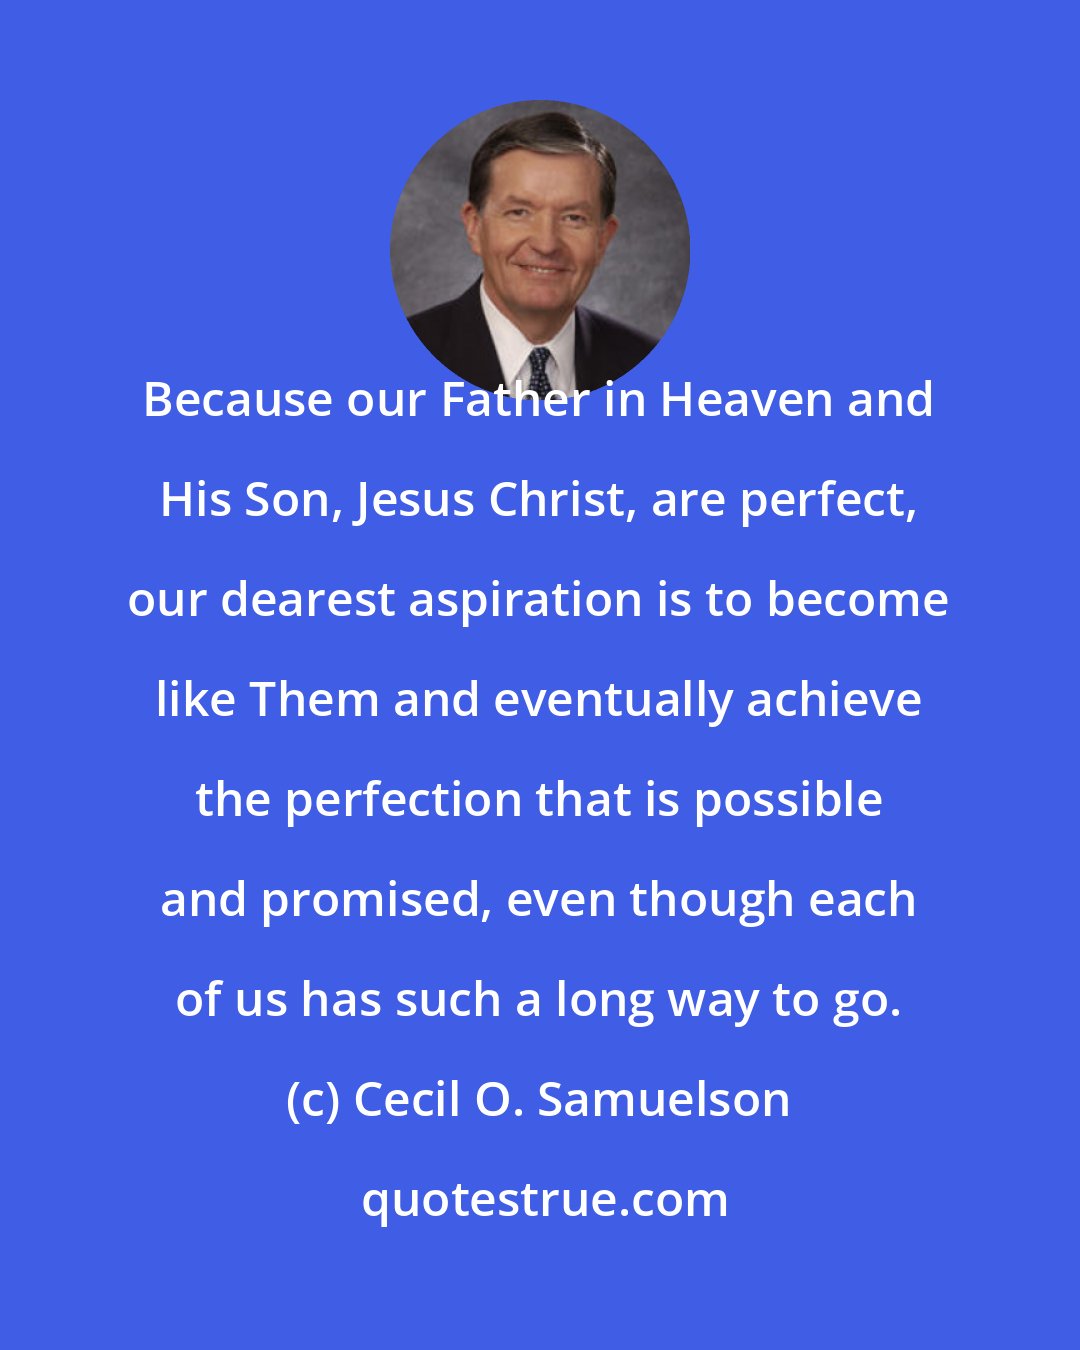 Cecil O. Samuelson: Because our Father in Heaven and His Son, Jesus Christ, are perfect, our dearest aspiration is to become like Them and eventually achieve the perfection that is possible and promised, even though each of us has such a long way to go.